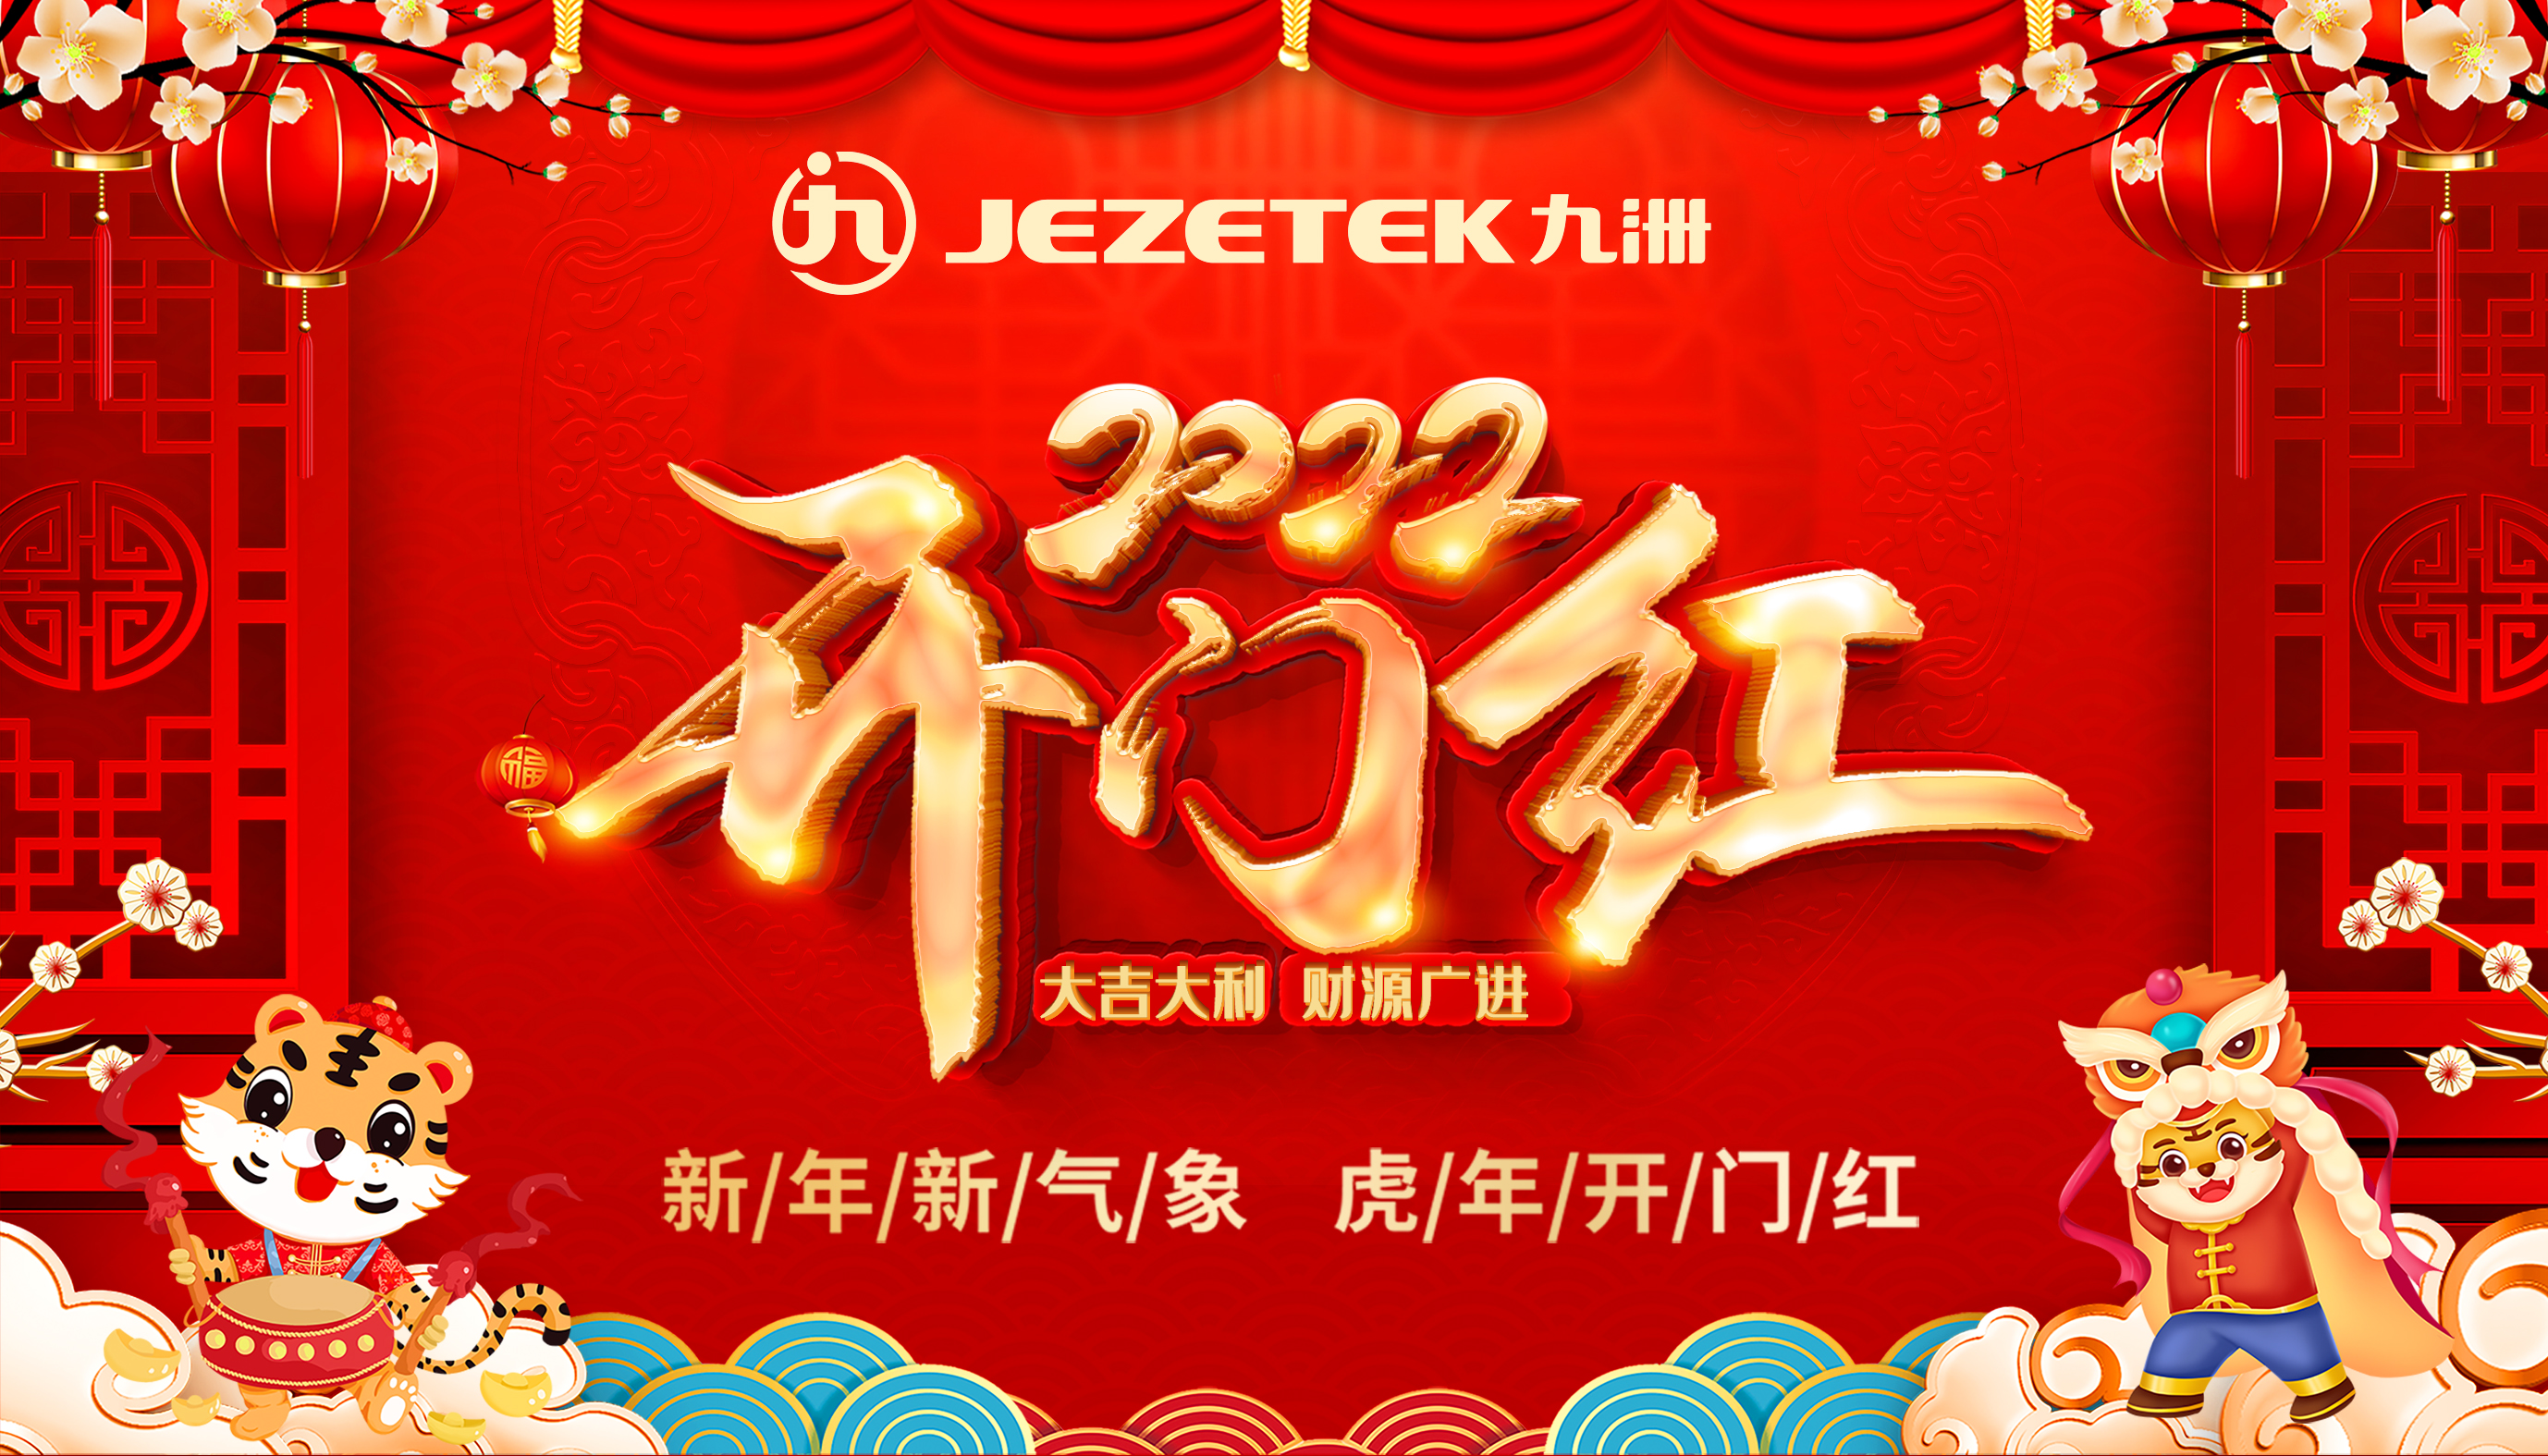 Shenzhen Jiuzhou Optoelectronics wishes everyone great luck in the Year of the Tiger!